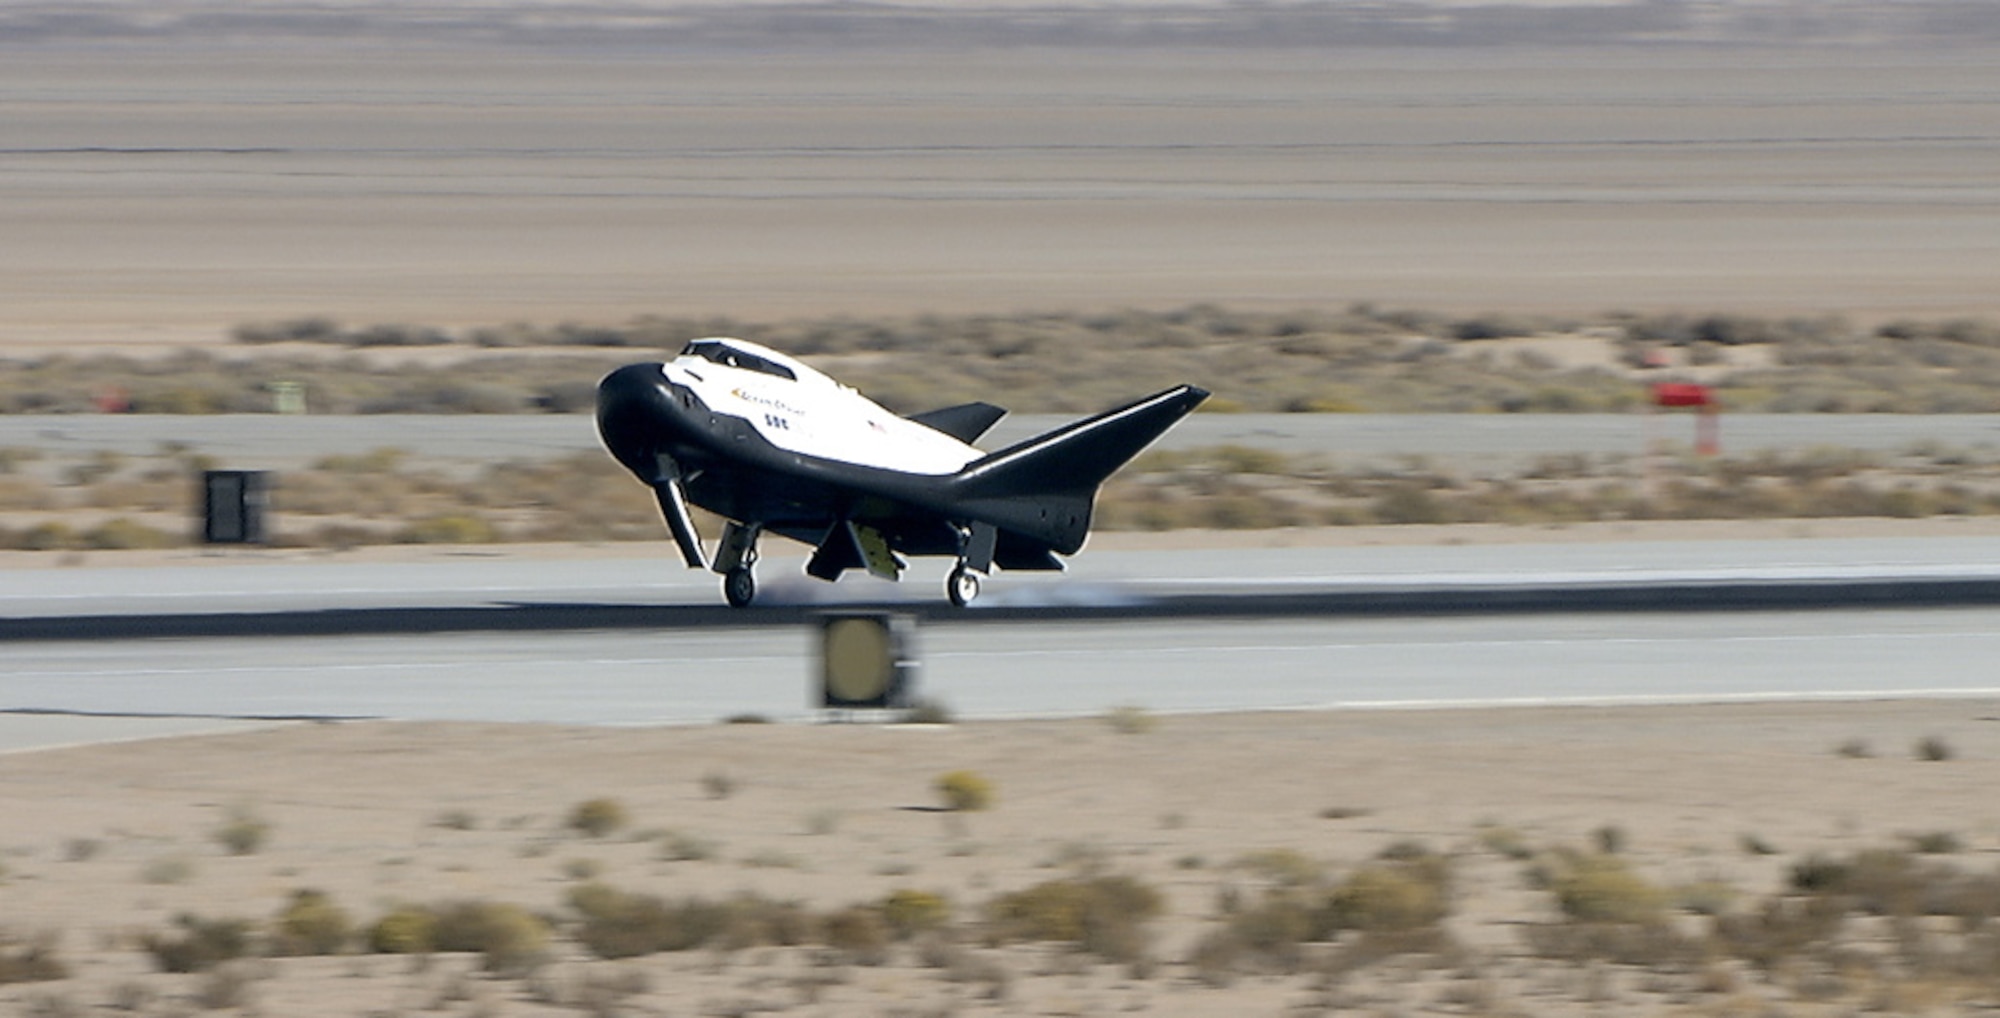 Sierra Nevada Corp’s Dream Chaser lands on Edwards Air Force Base in California. The spacecraft went through preparations for flight at NASA’s Armstrong Flight Research Center.

Credits: NASA / Carla Thomas